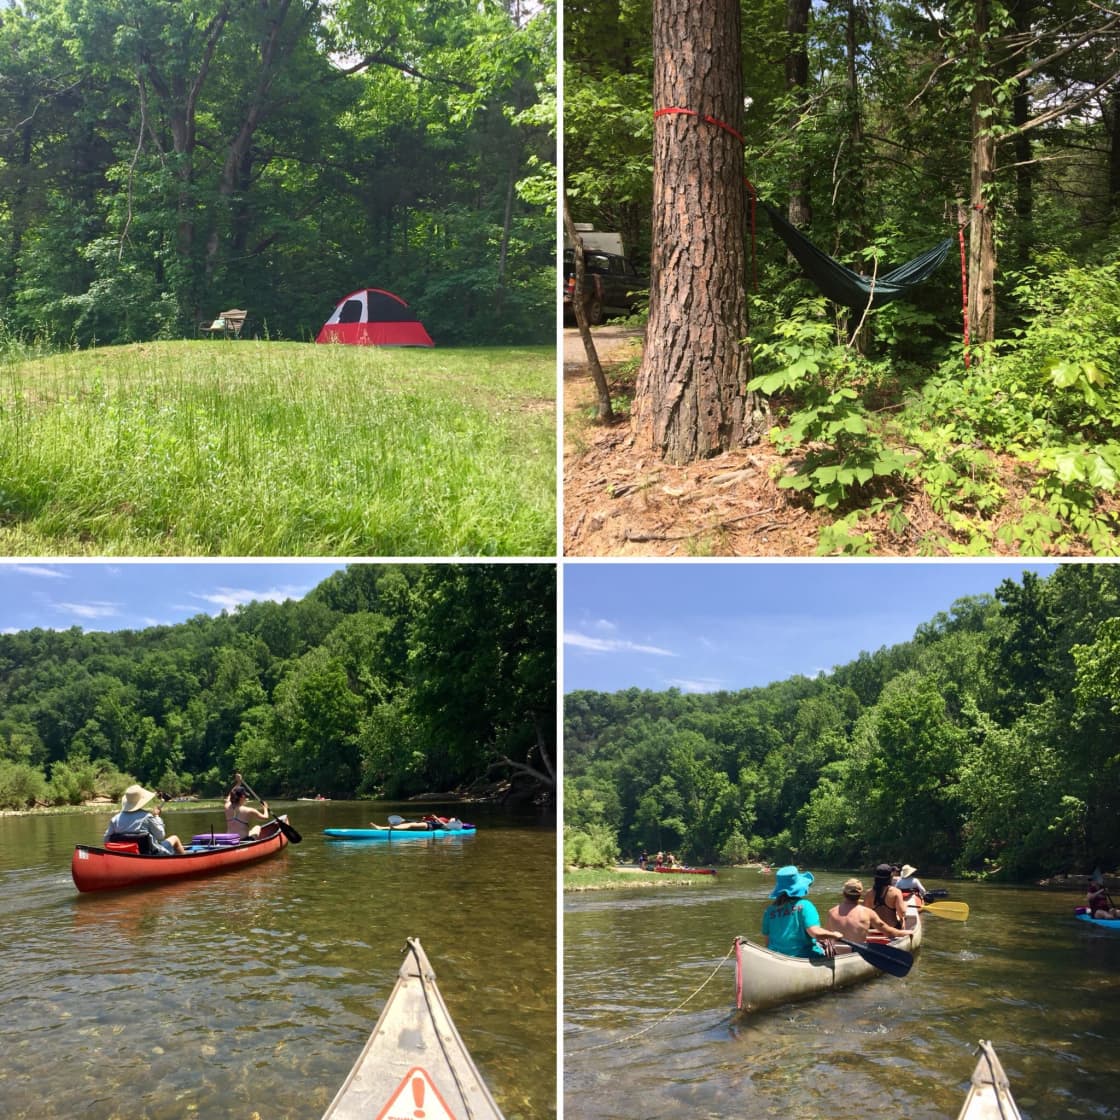 There are a few campsites by the large pond, wooded camp areas as well.  Floating the Buffalo River is a popular activity